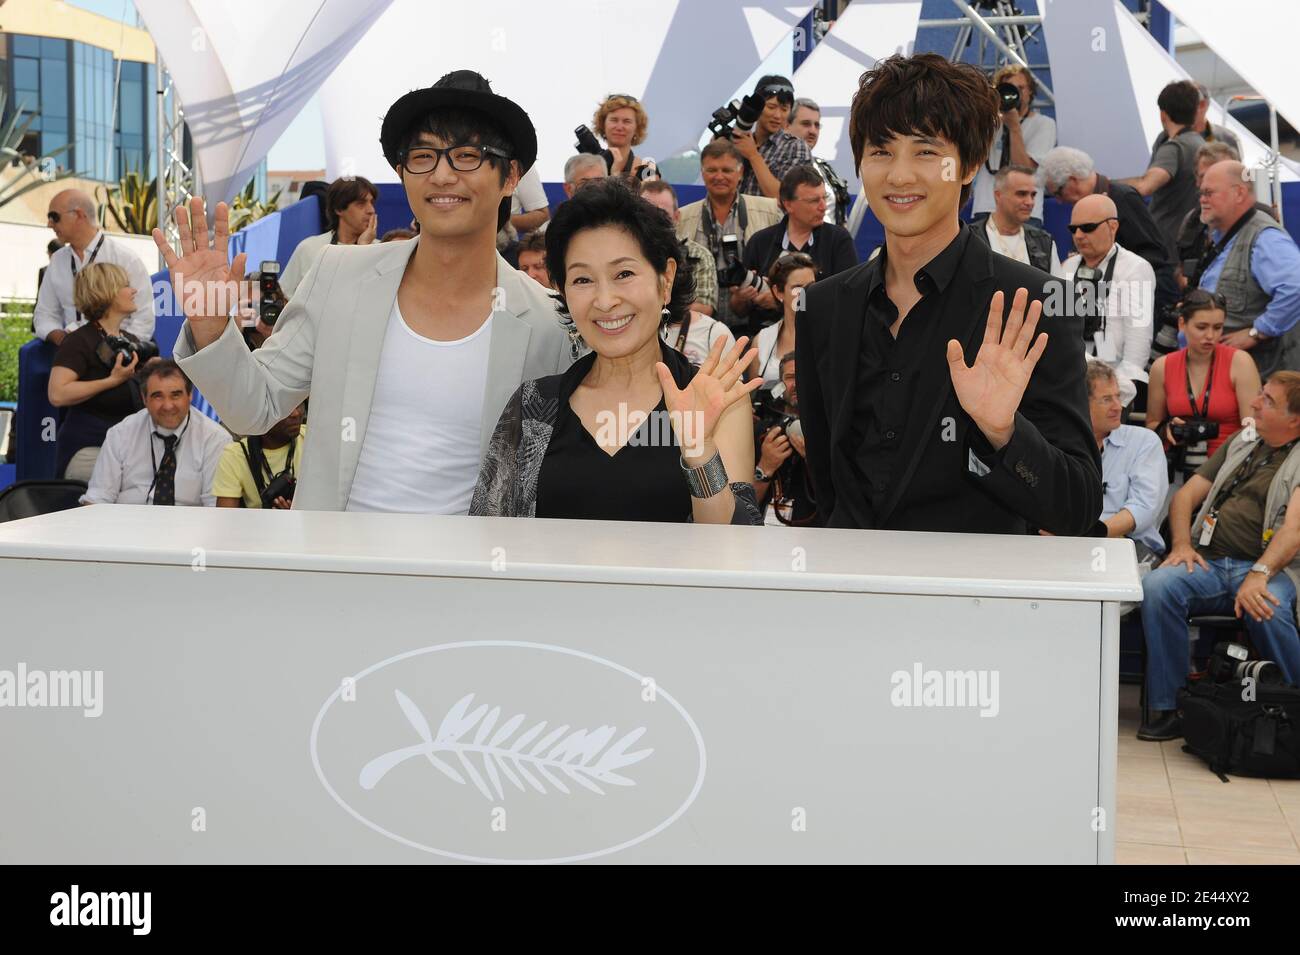 Actors Jin Goo and Won Bin, Actress Kim Hye-Ja attend the 'Mother' Photocall held at the Palais Des Festival during the 62nd International Cannes Film Festival in Cannes, France on May 16, 2009. Photo by Nebinger-Orban/ABACAPRESS.COM Stock Photo